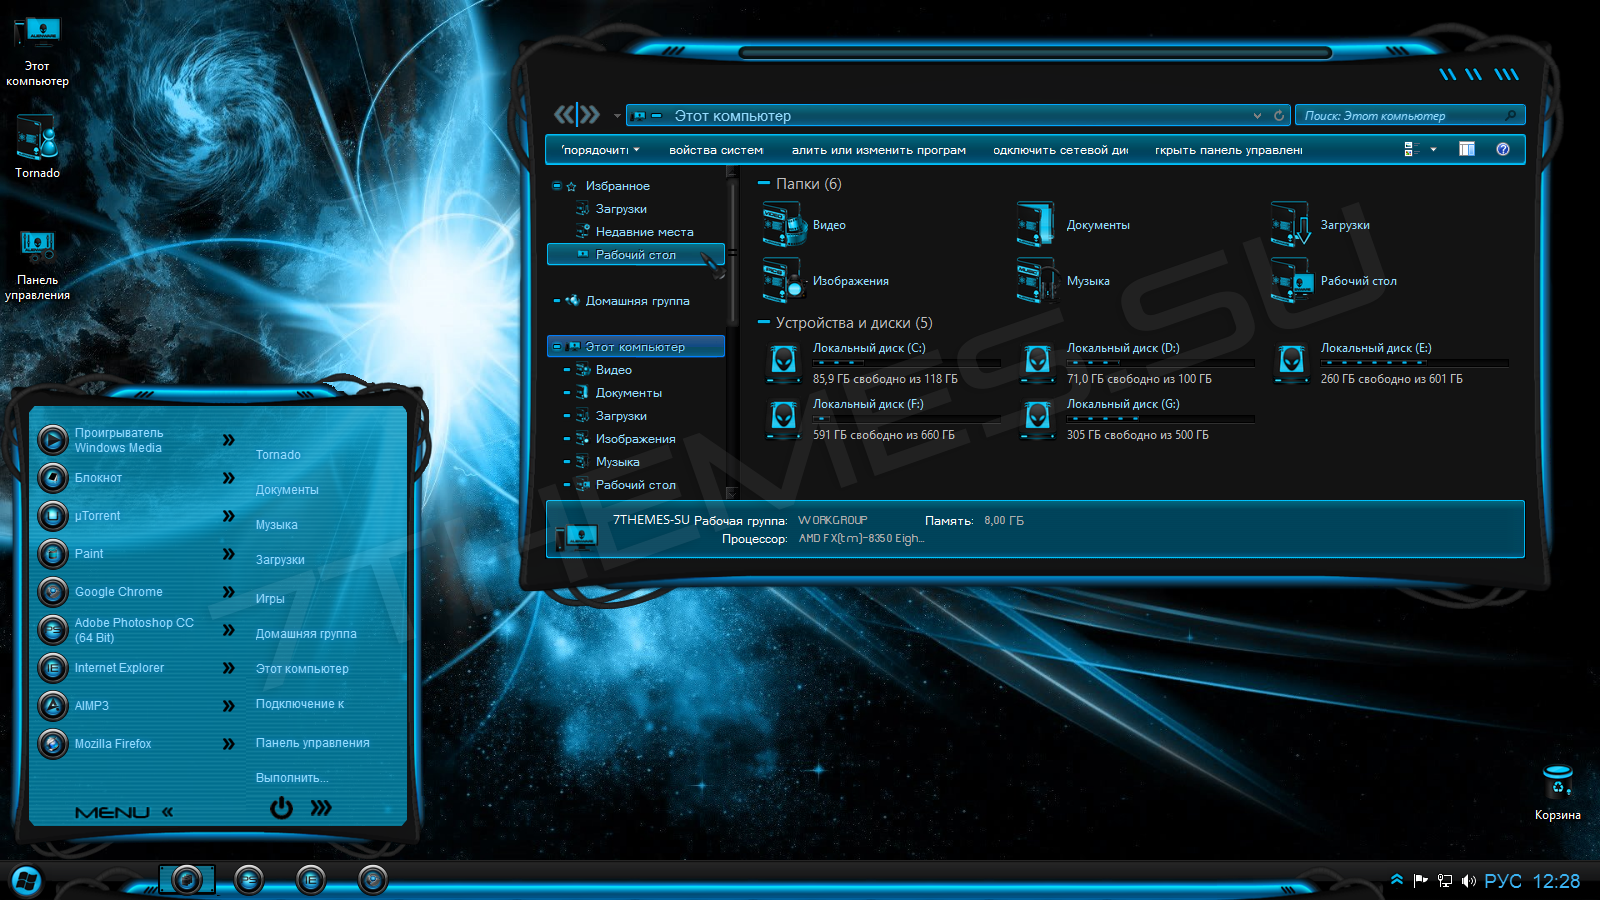 download clear glass theme windows 7